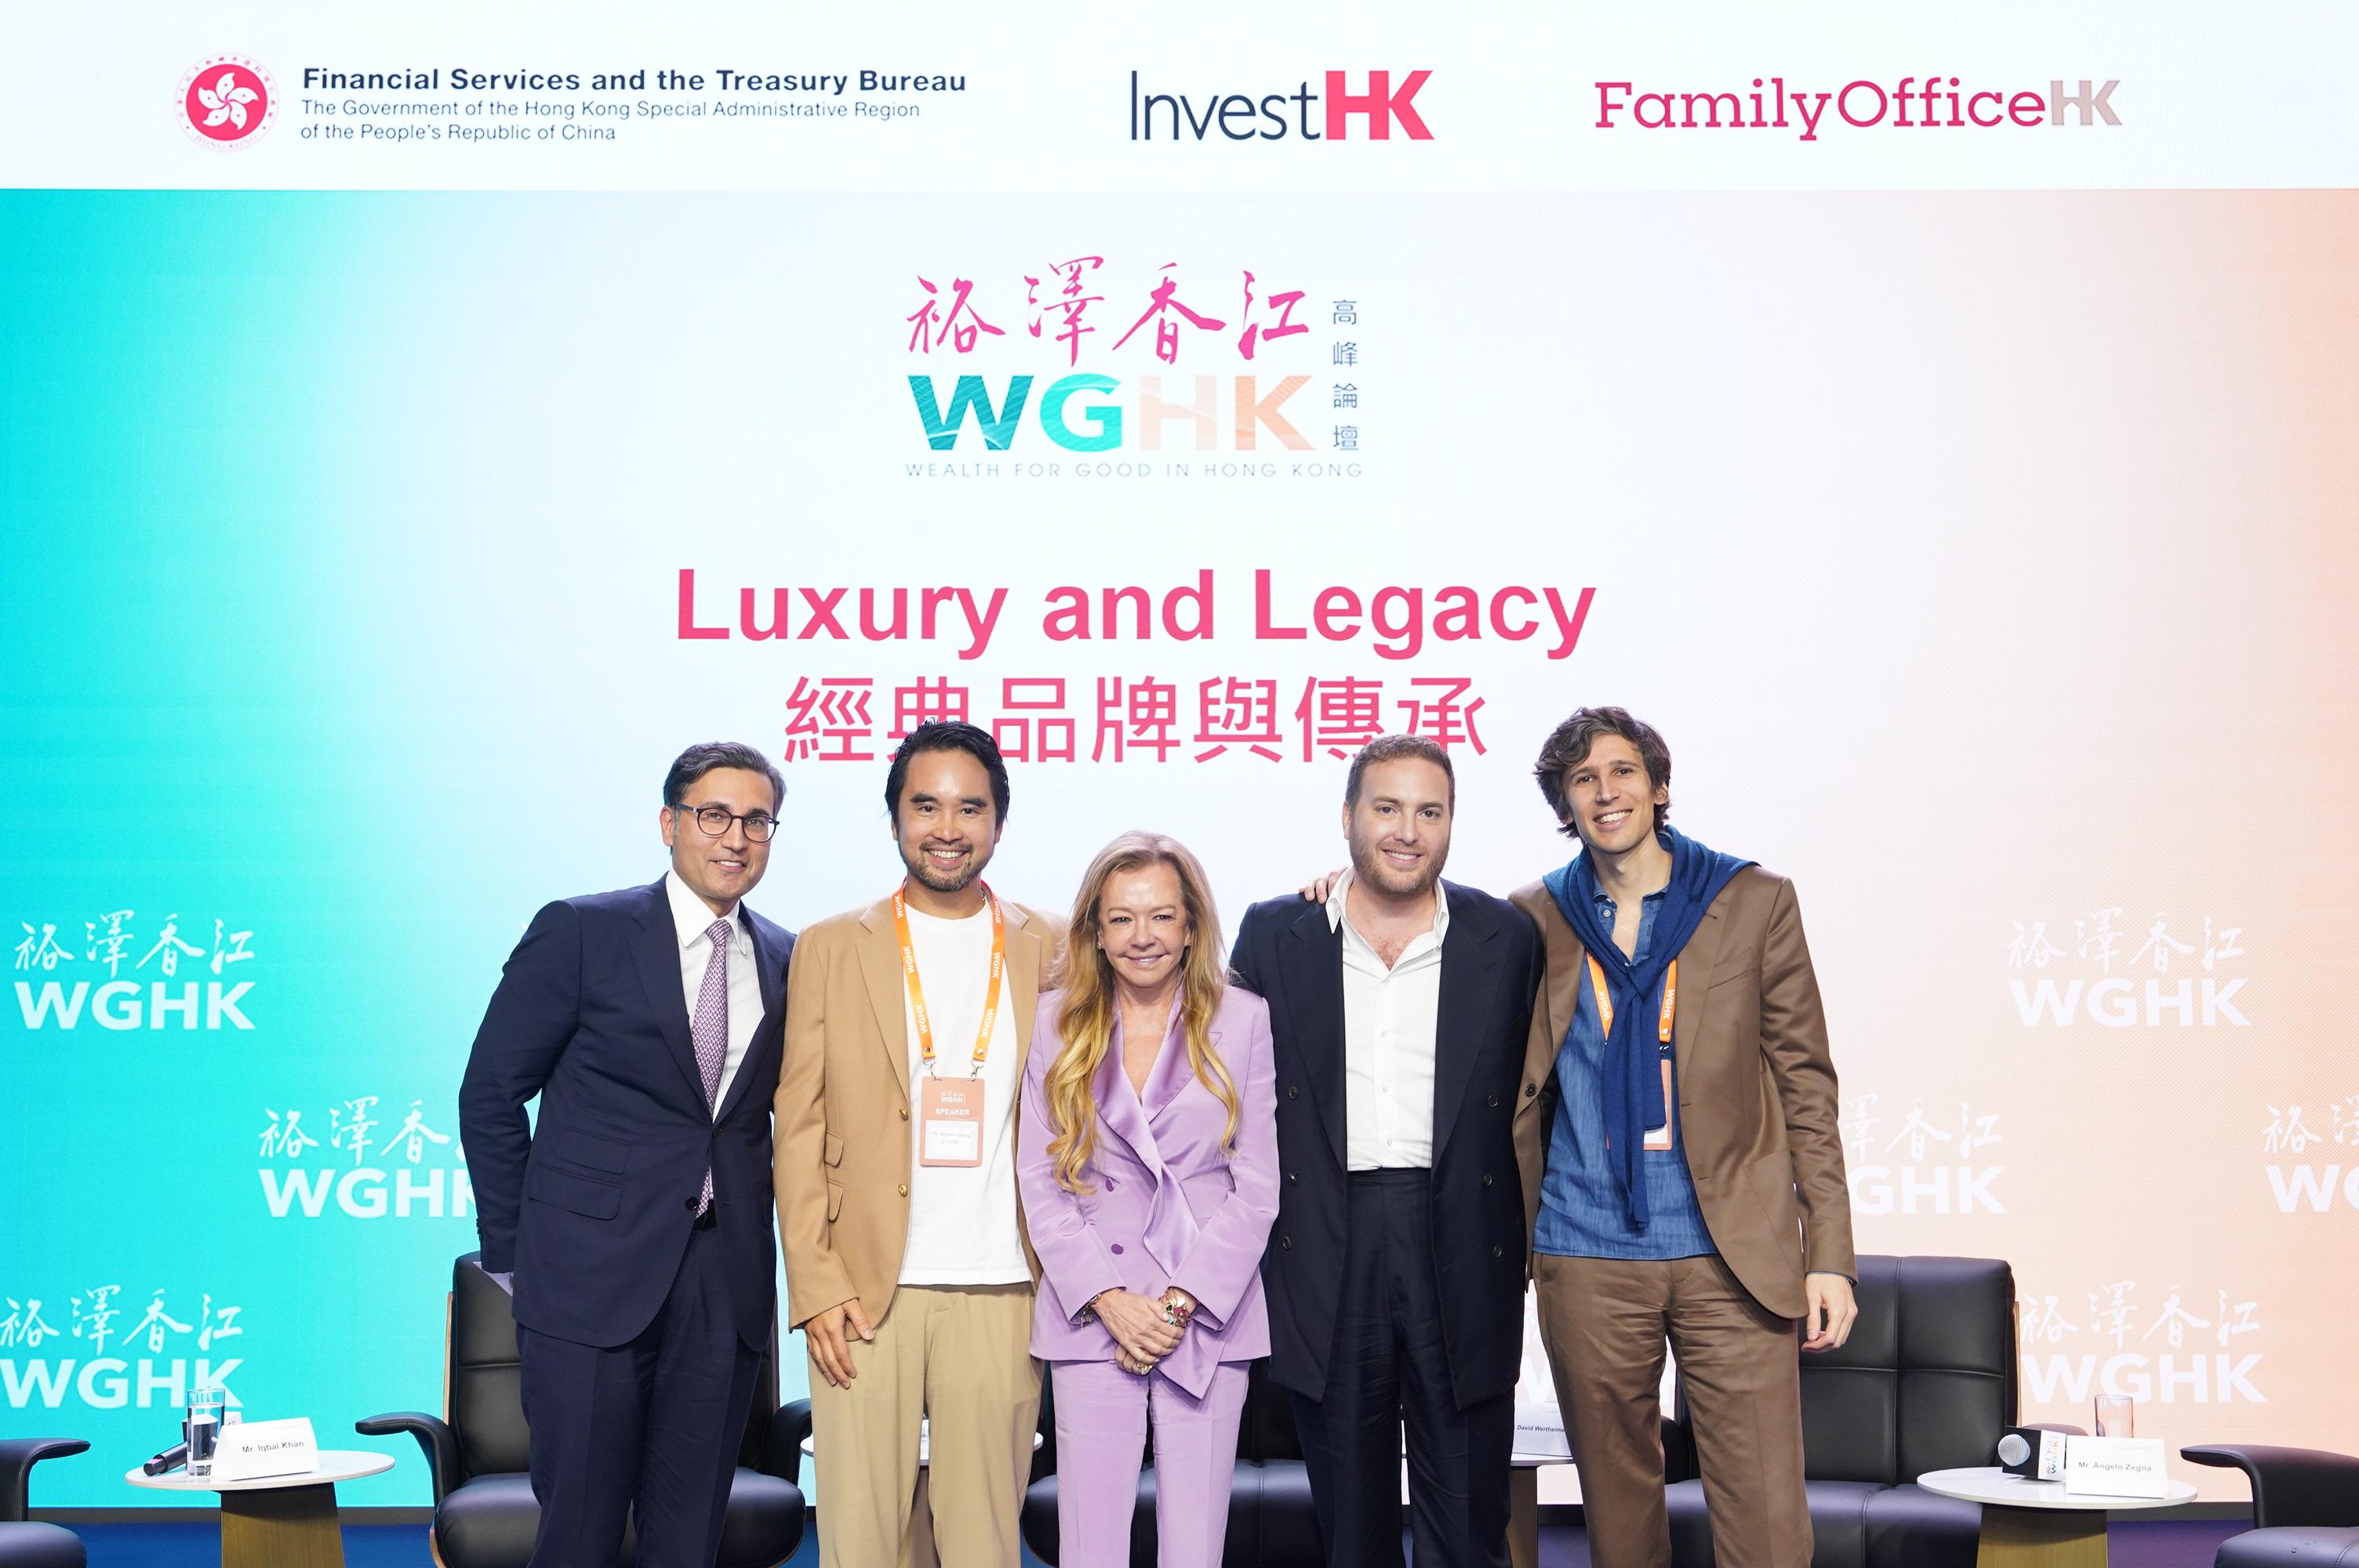 Pictured are the moderator and speakers who sat in the Luxury and Legacy panel discussion at the Wealth for Good in Hong Kong Summit today (March 27) (from left) President Global Wealth Management of UBS AG, Mr Iqbal Khan; Chairman of The Hong Kong Academy for Wealth Legacy, Dr Adrian Cheng; Artistic Director and Co-President of Chopard, Ms Caroline Scheufele; Founder of 1686 Partners Lifestyle Funds Franchise, Mr David Wertheimer; and Consumer & Retail Excellence Director of ZEGNA, Mr Angelo Zegna.